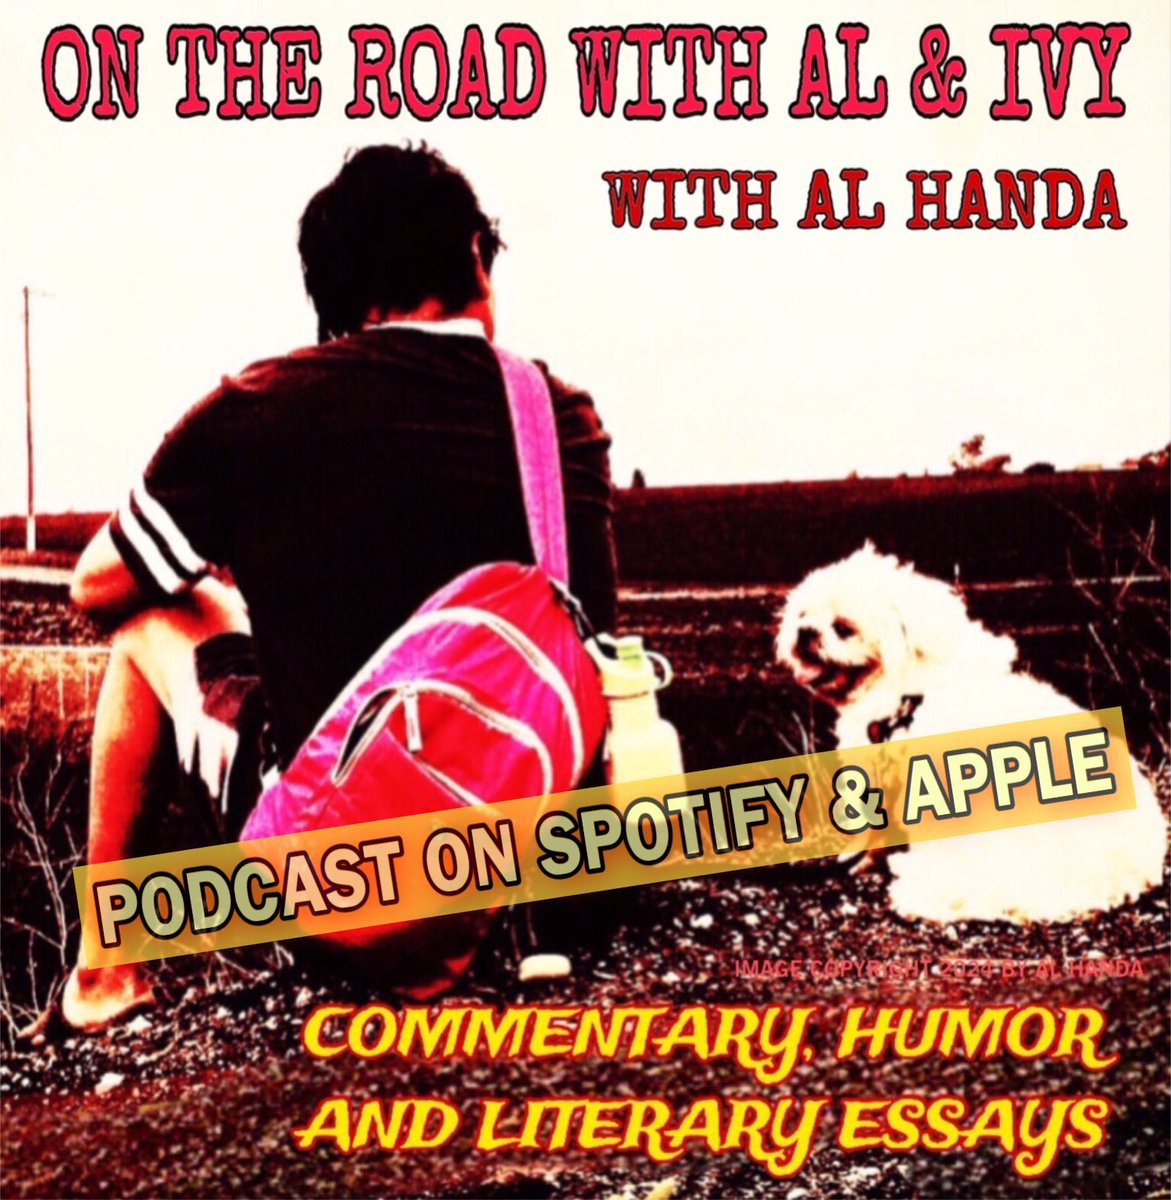 Update on Podcast: Changing back to the original blog format and show is now available on Apple. There's one more change to the podcast format, which is in many of the descriptions of the show, the old title of the blog is going to be used again. It will read 'On The Road With